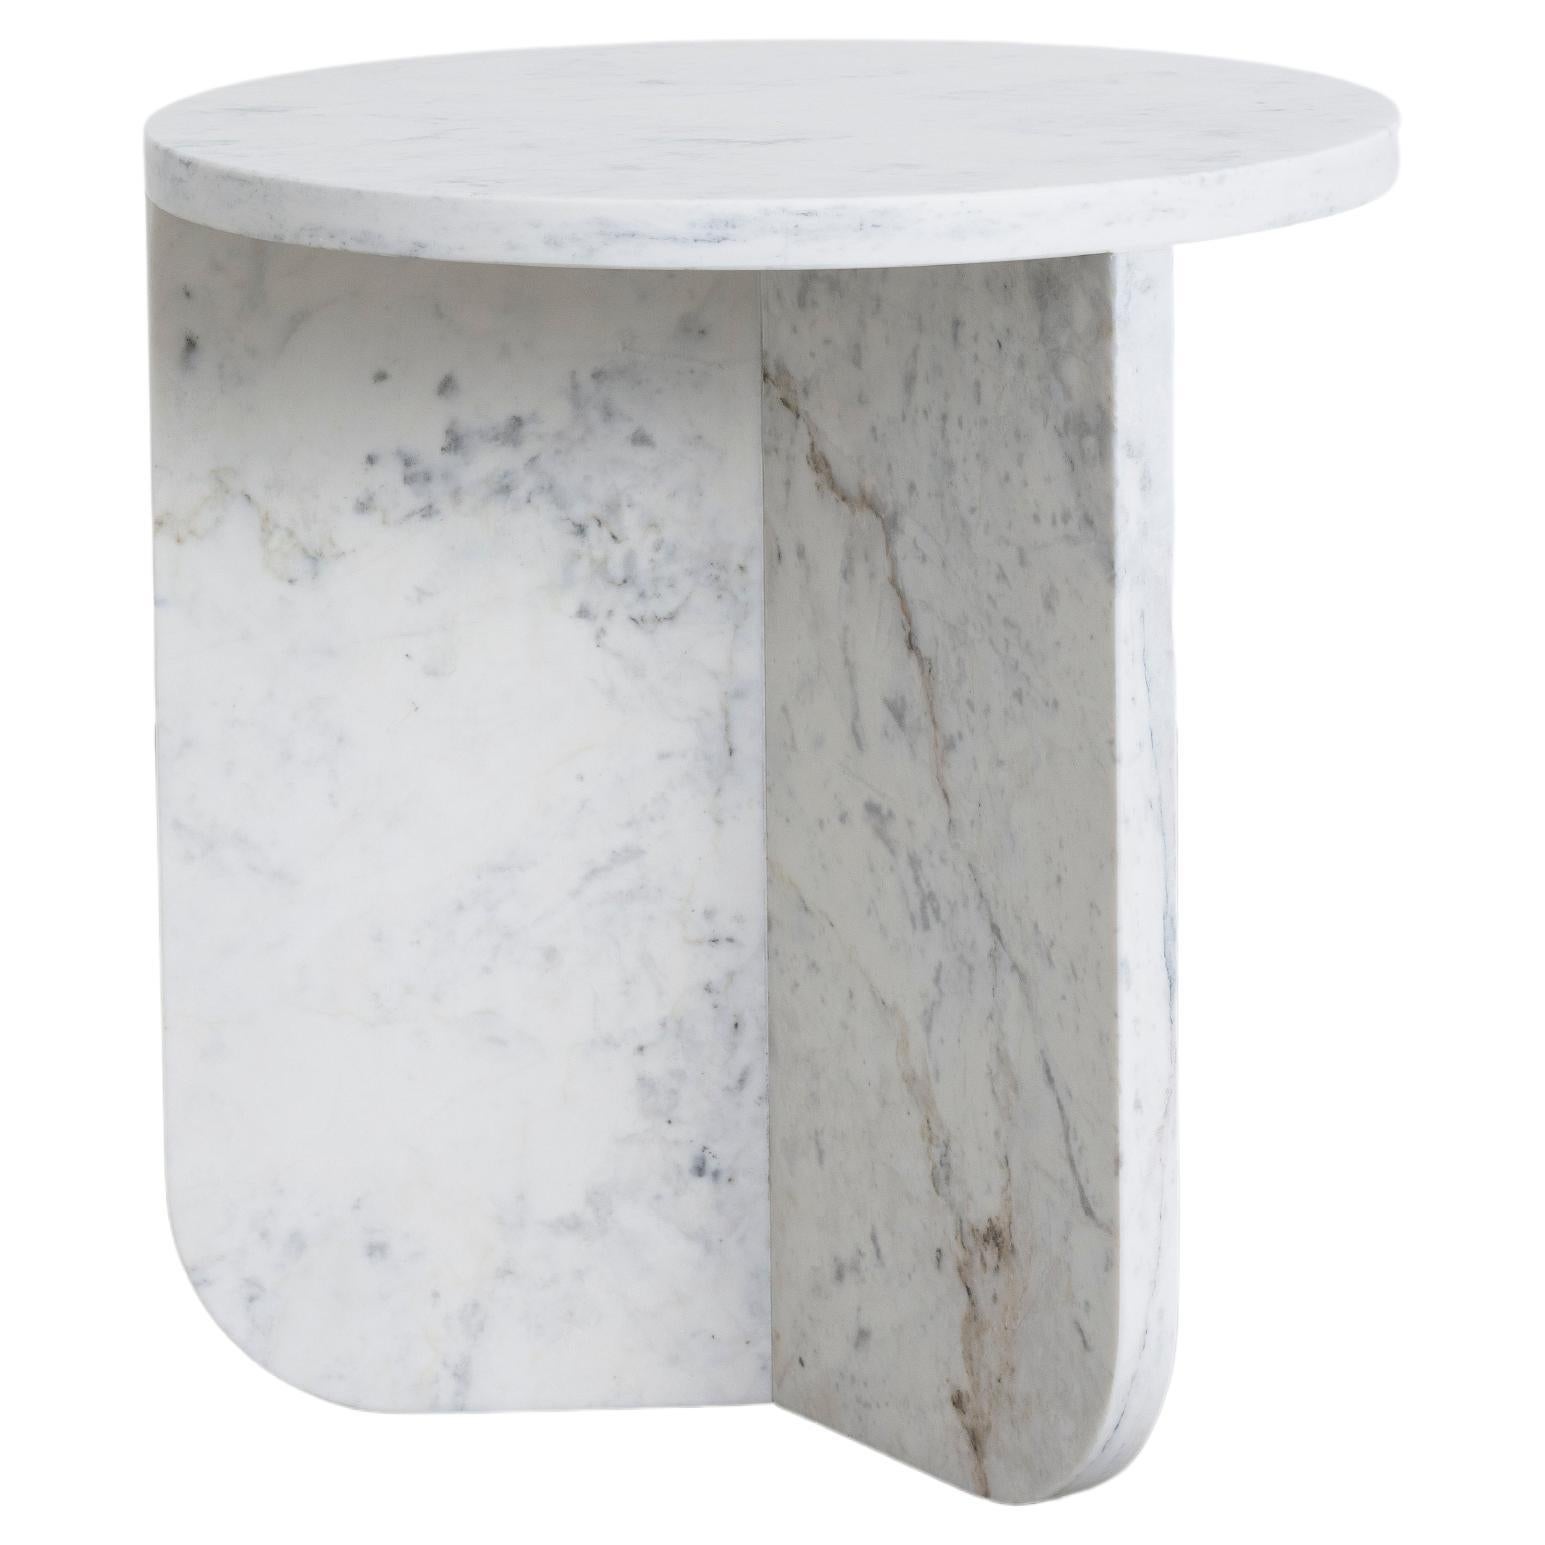 Leme Table, High, by Rain, Contemporary Side Table, White Matarazzo Marble